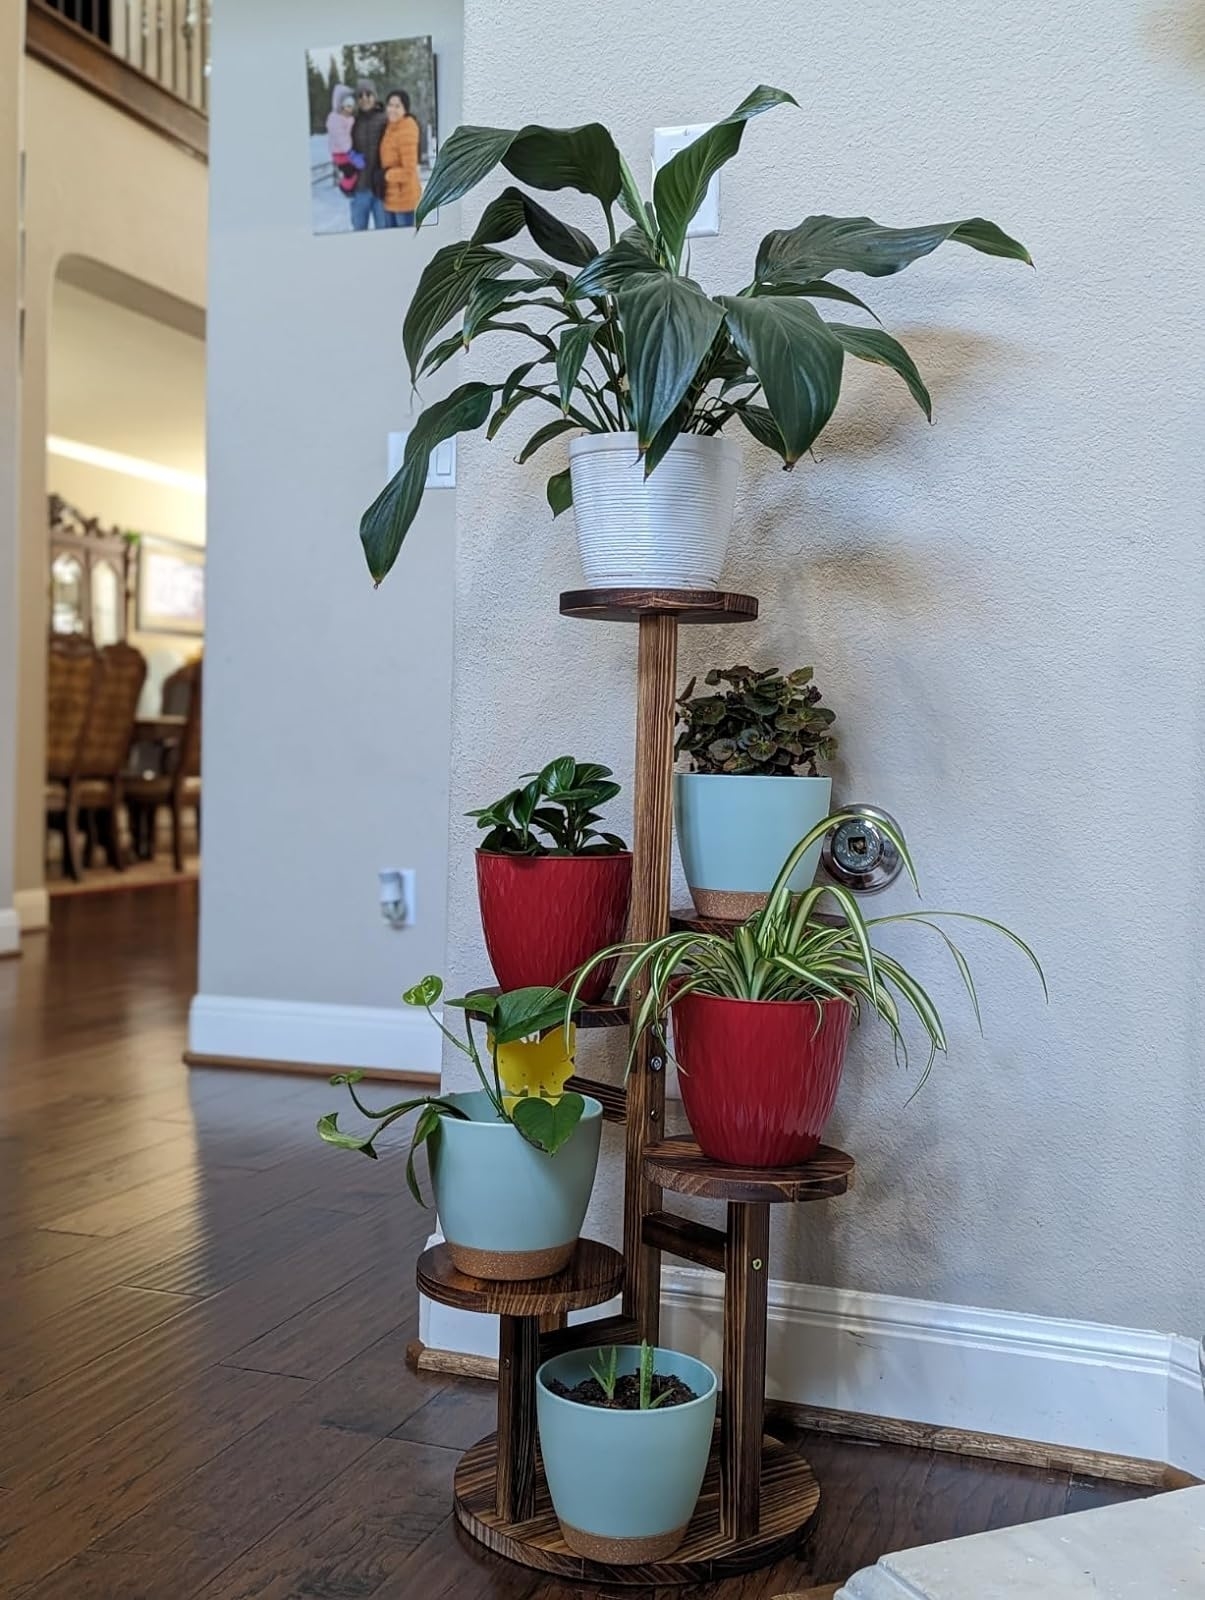 A multi-tiered wooden plant stand holding various houseplants in pots inside a home